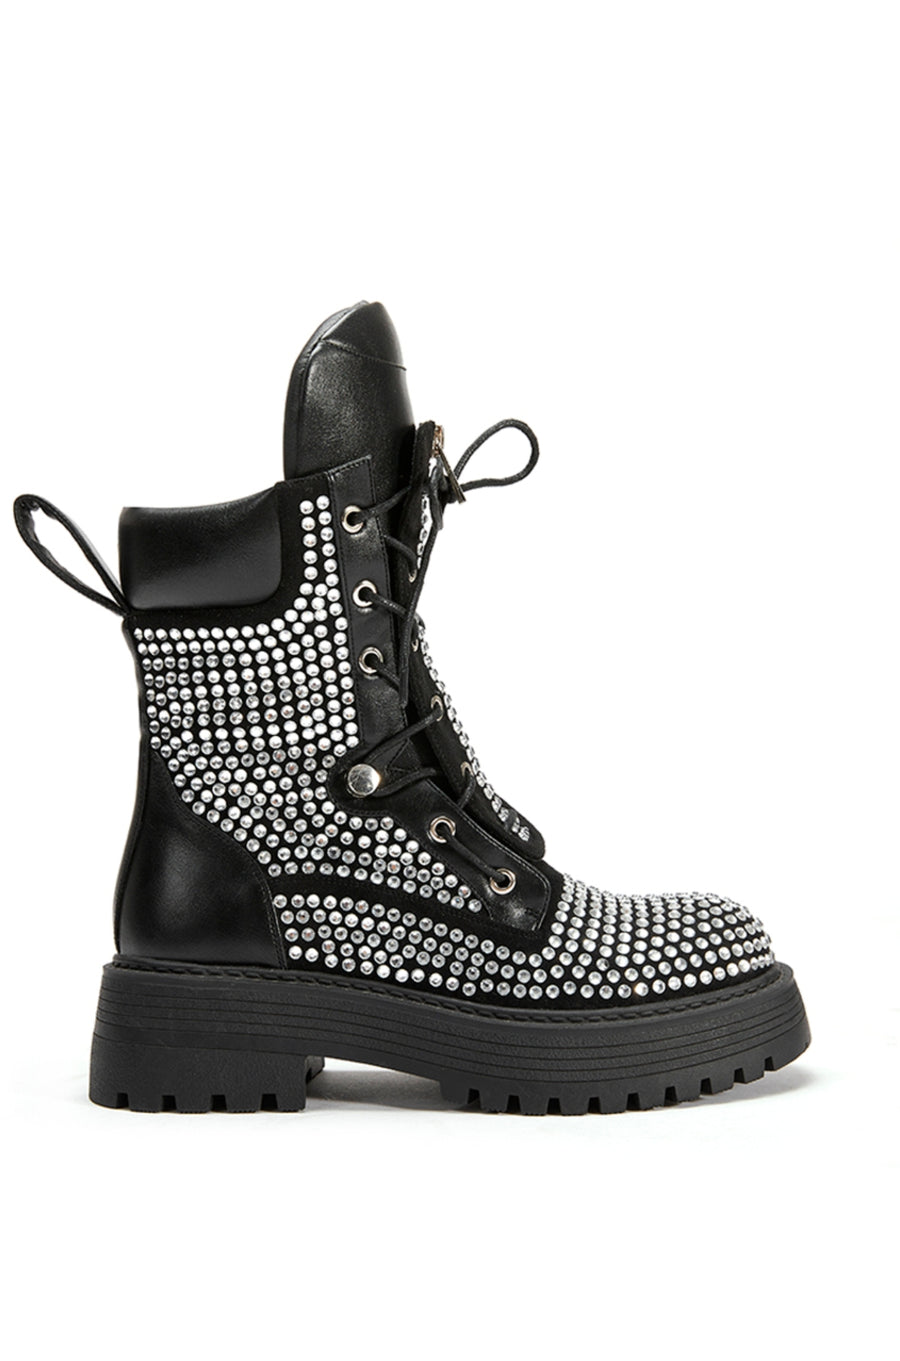 side view of sturdy black combat boots with a platform sole and silver rhinestone accent